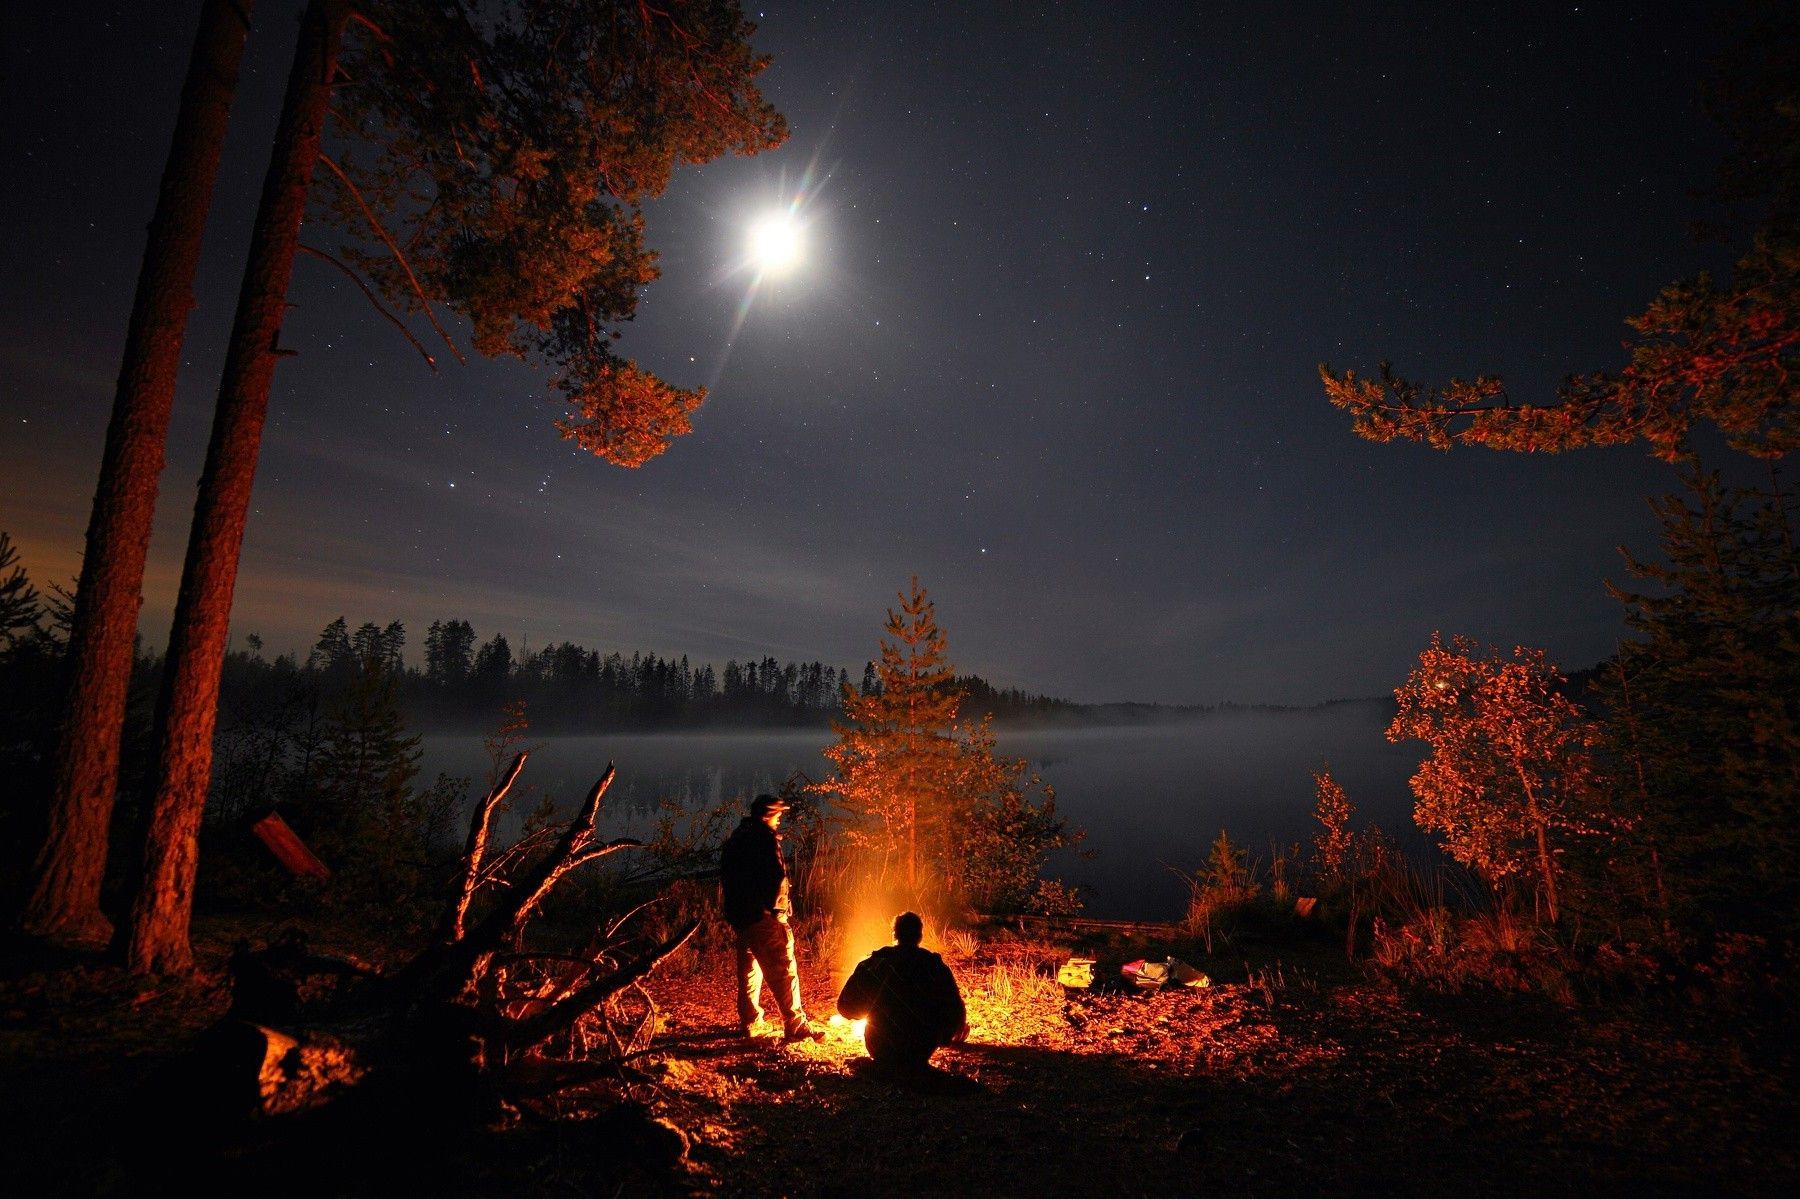 People sitting around a campfire under a full moon - Camping